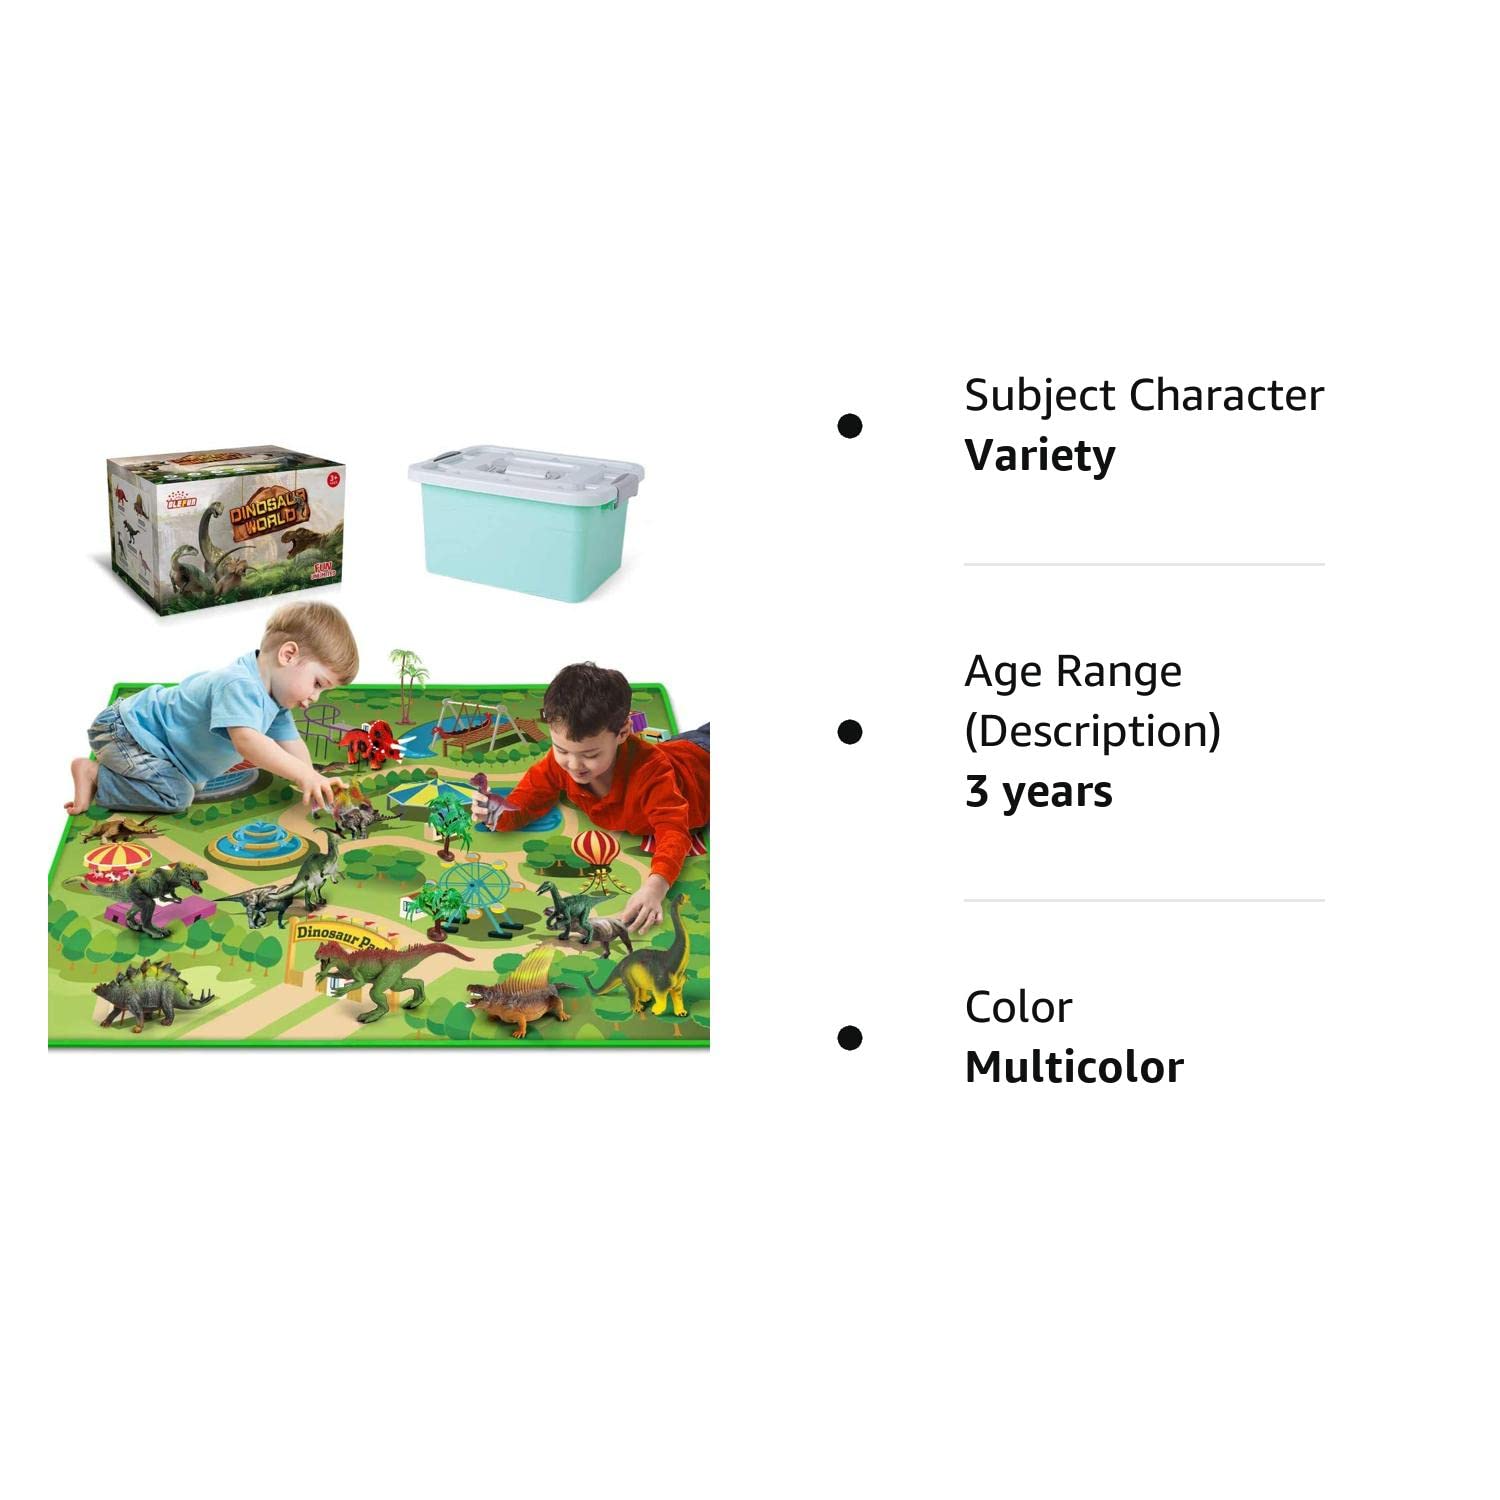 Dinosaur Toys with Dinosaur Figures, Activity Play Mat & Trees for Creating a Dino World Including T-Rex, Triceratops, etc, Perfect Dinosaur Playset for 3,4,5,6 Years Old Kids, Boys & Girls